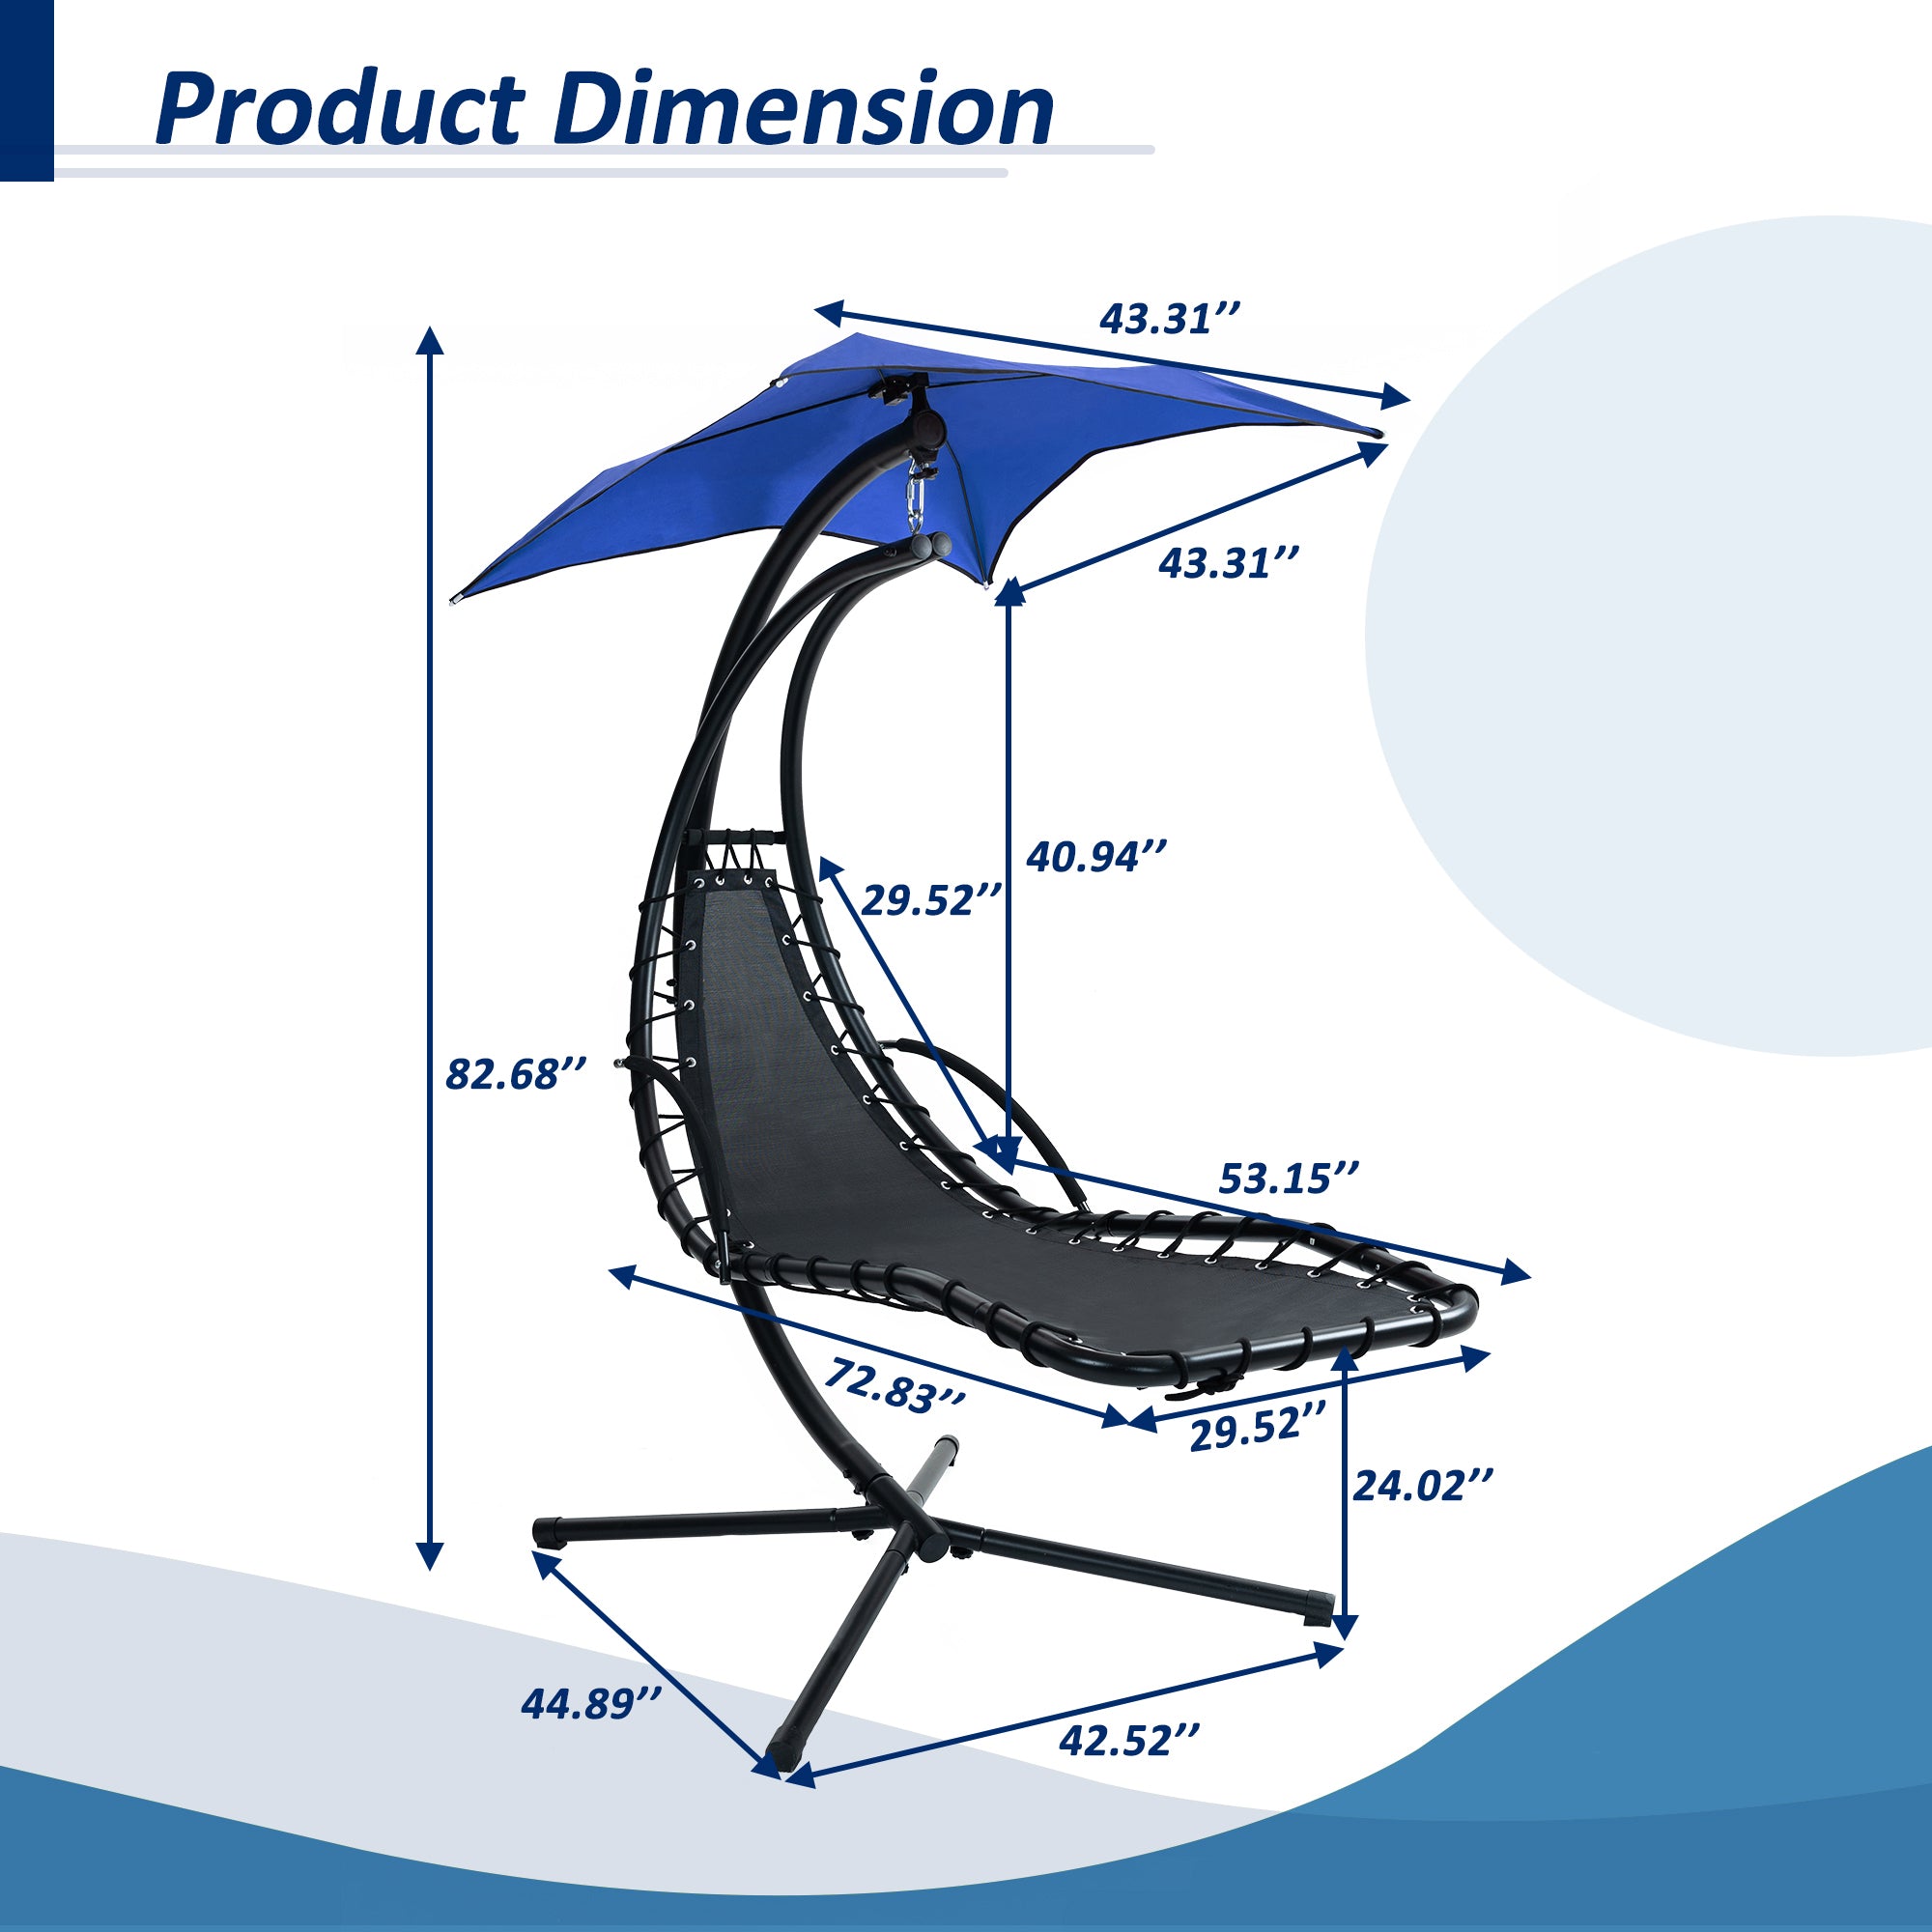 Hanging Chaise Lounger with Removable Canopy, Outdoor navy-metal